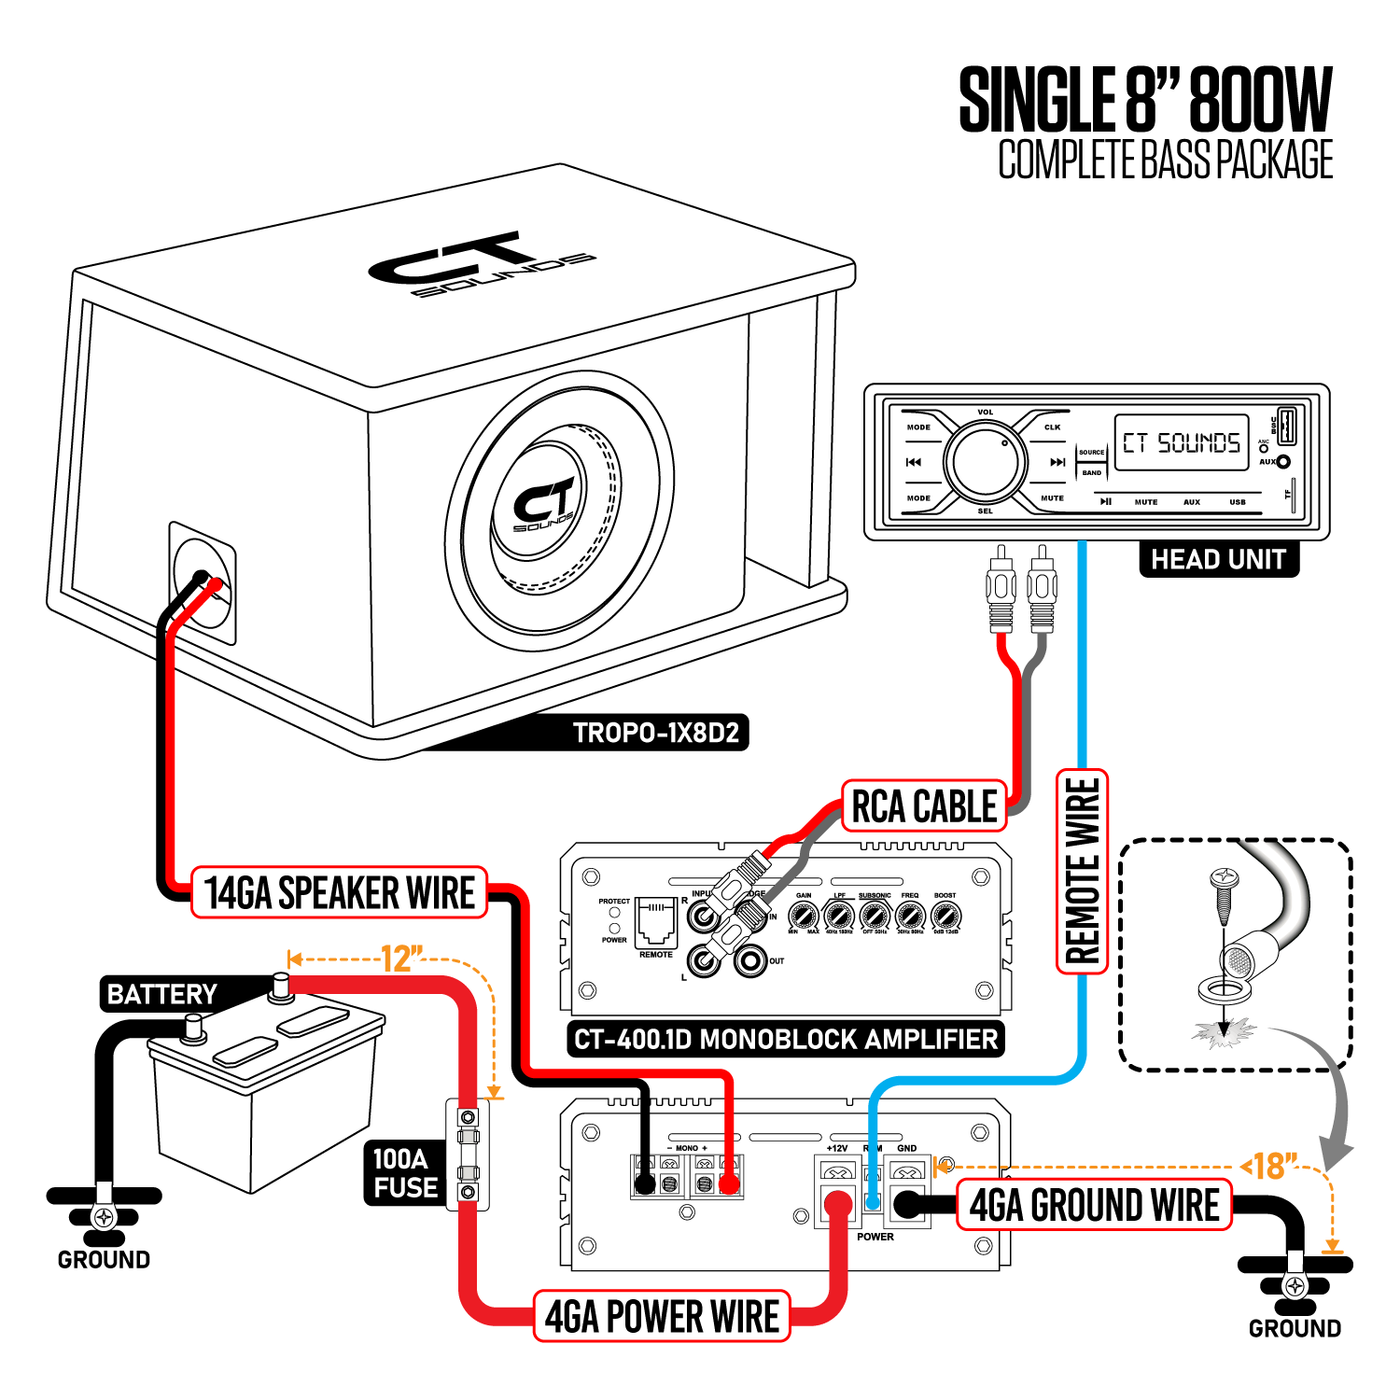 Single 8” 800W Complete Bass Package with Loaded Subwoofer Box and Amplifier